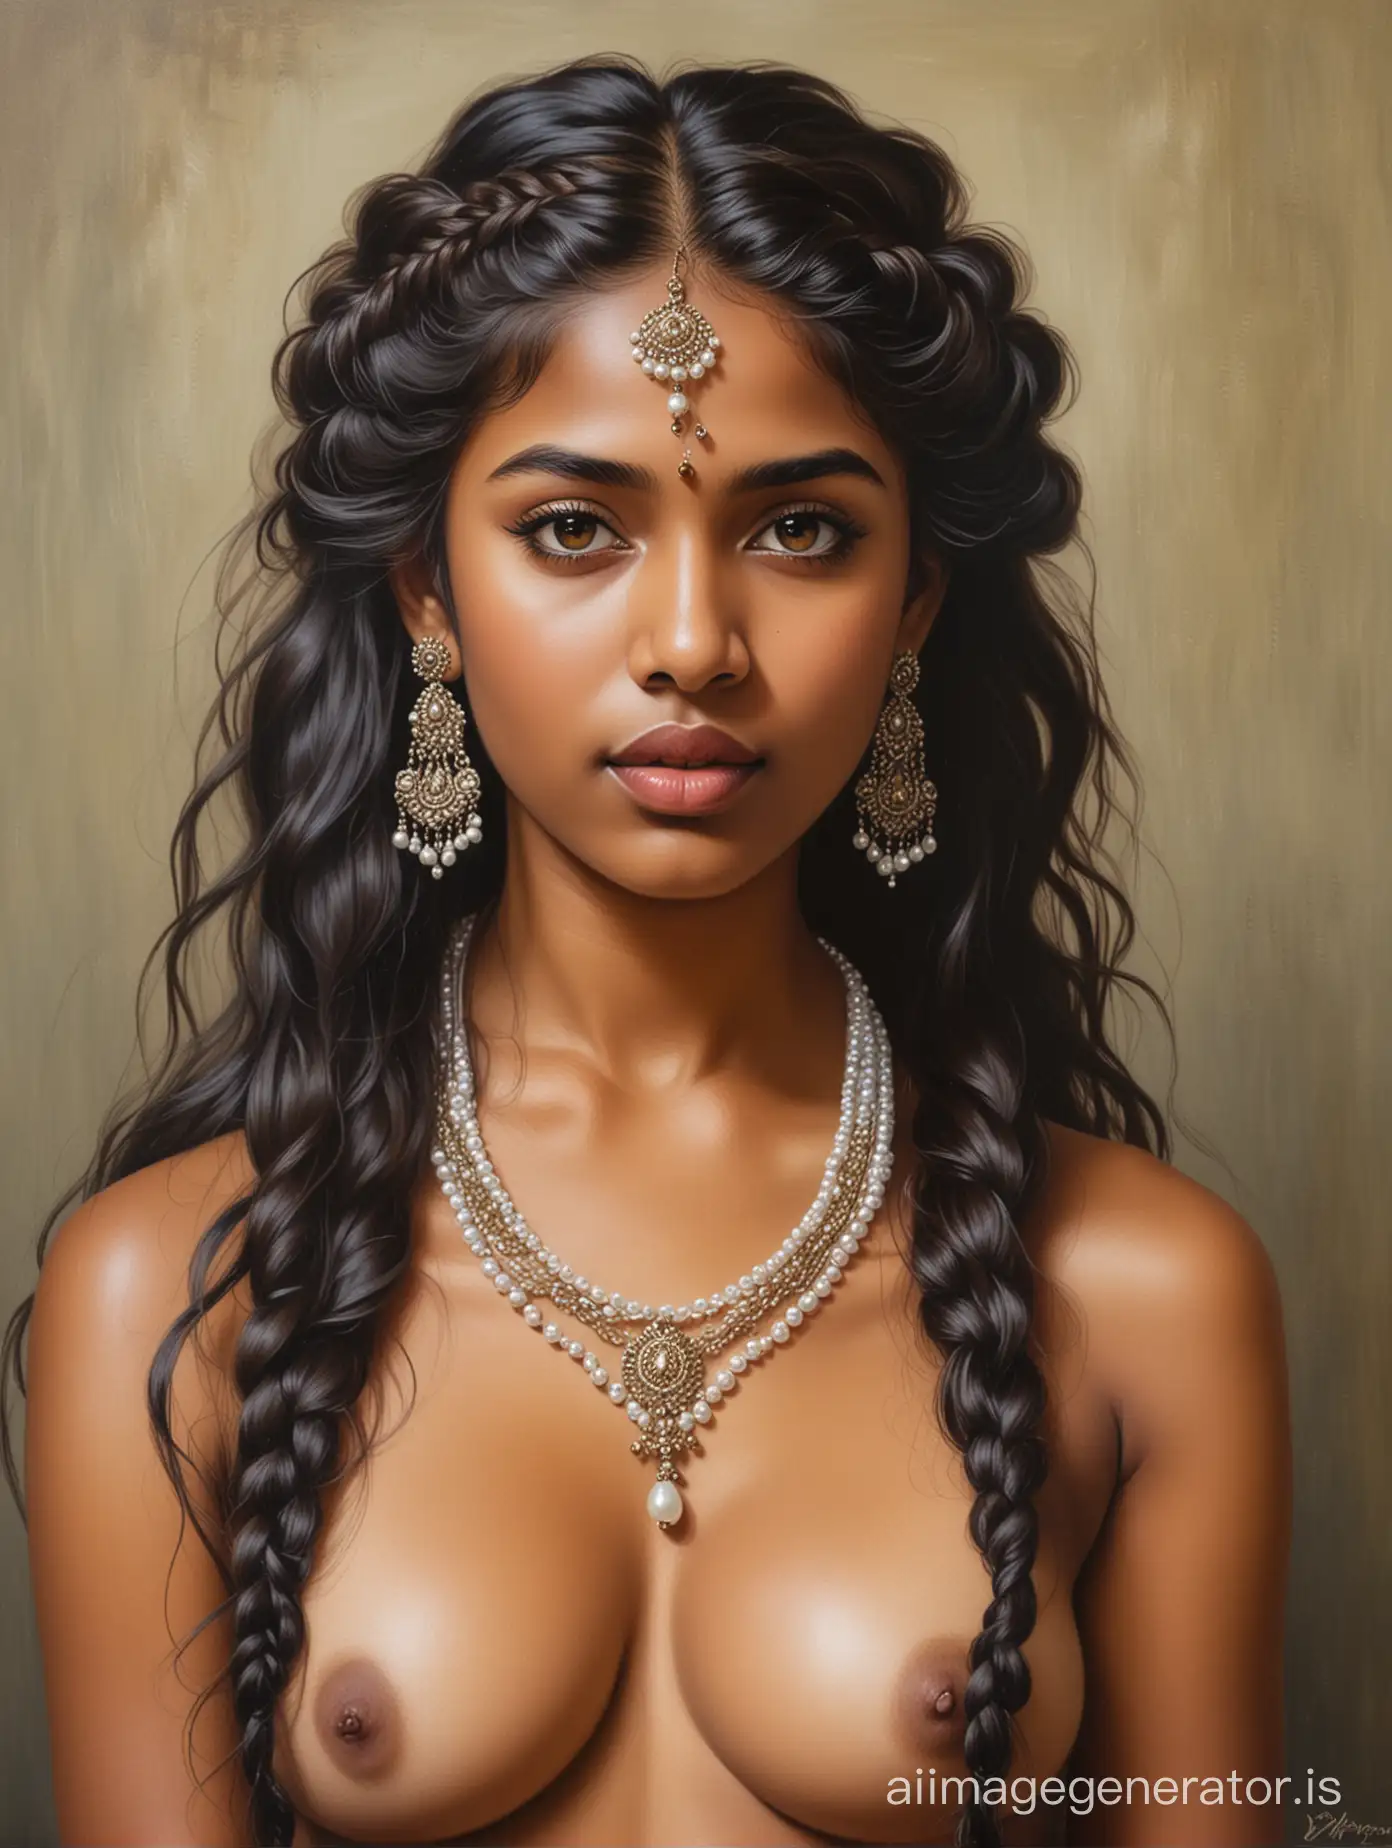 Exquisite-Oil-Painting-Front-View-of-Nude-Tamil-Princess-with-Braided-Hair-and-Pearls